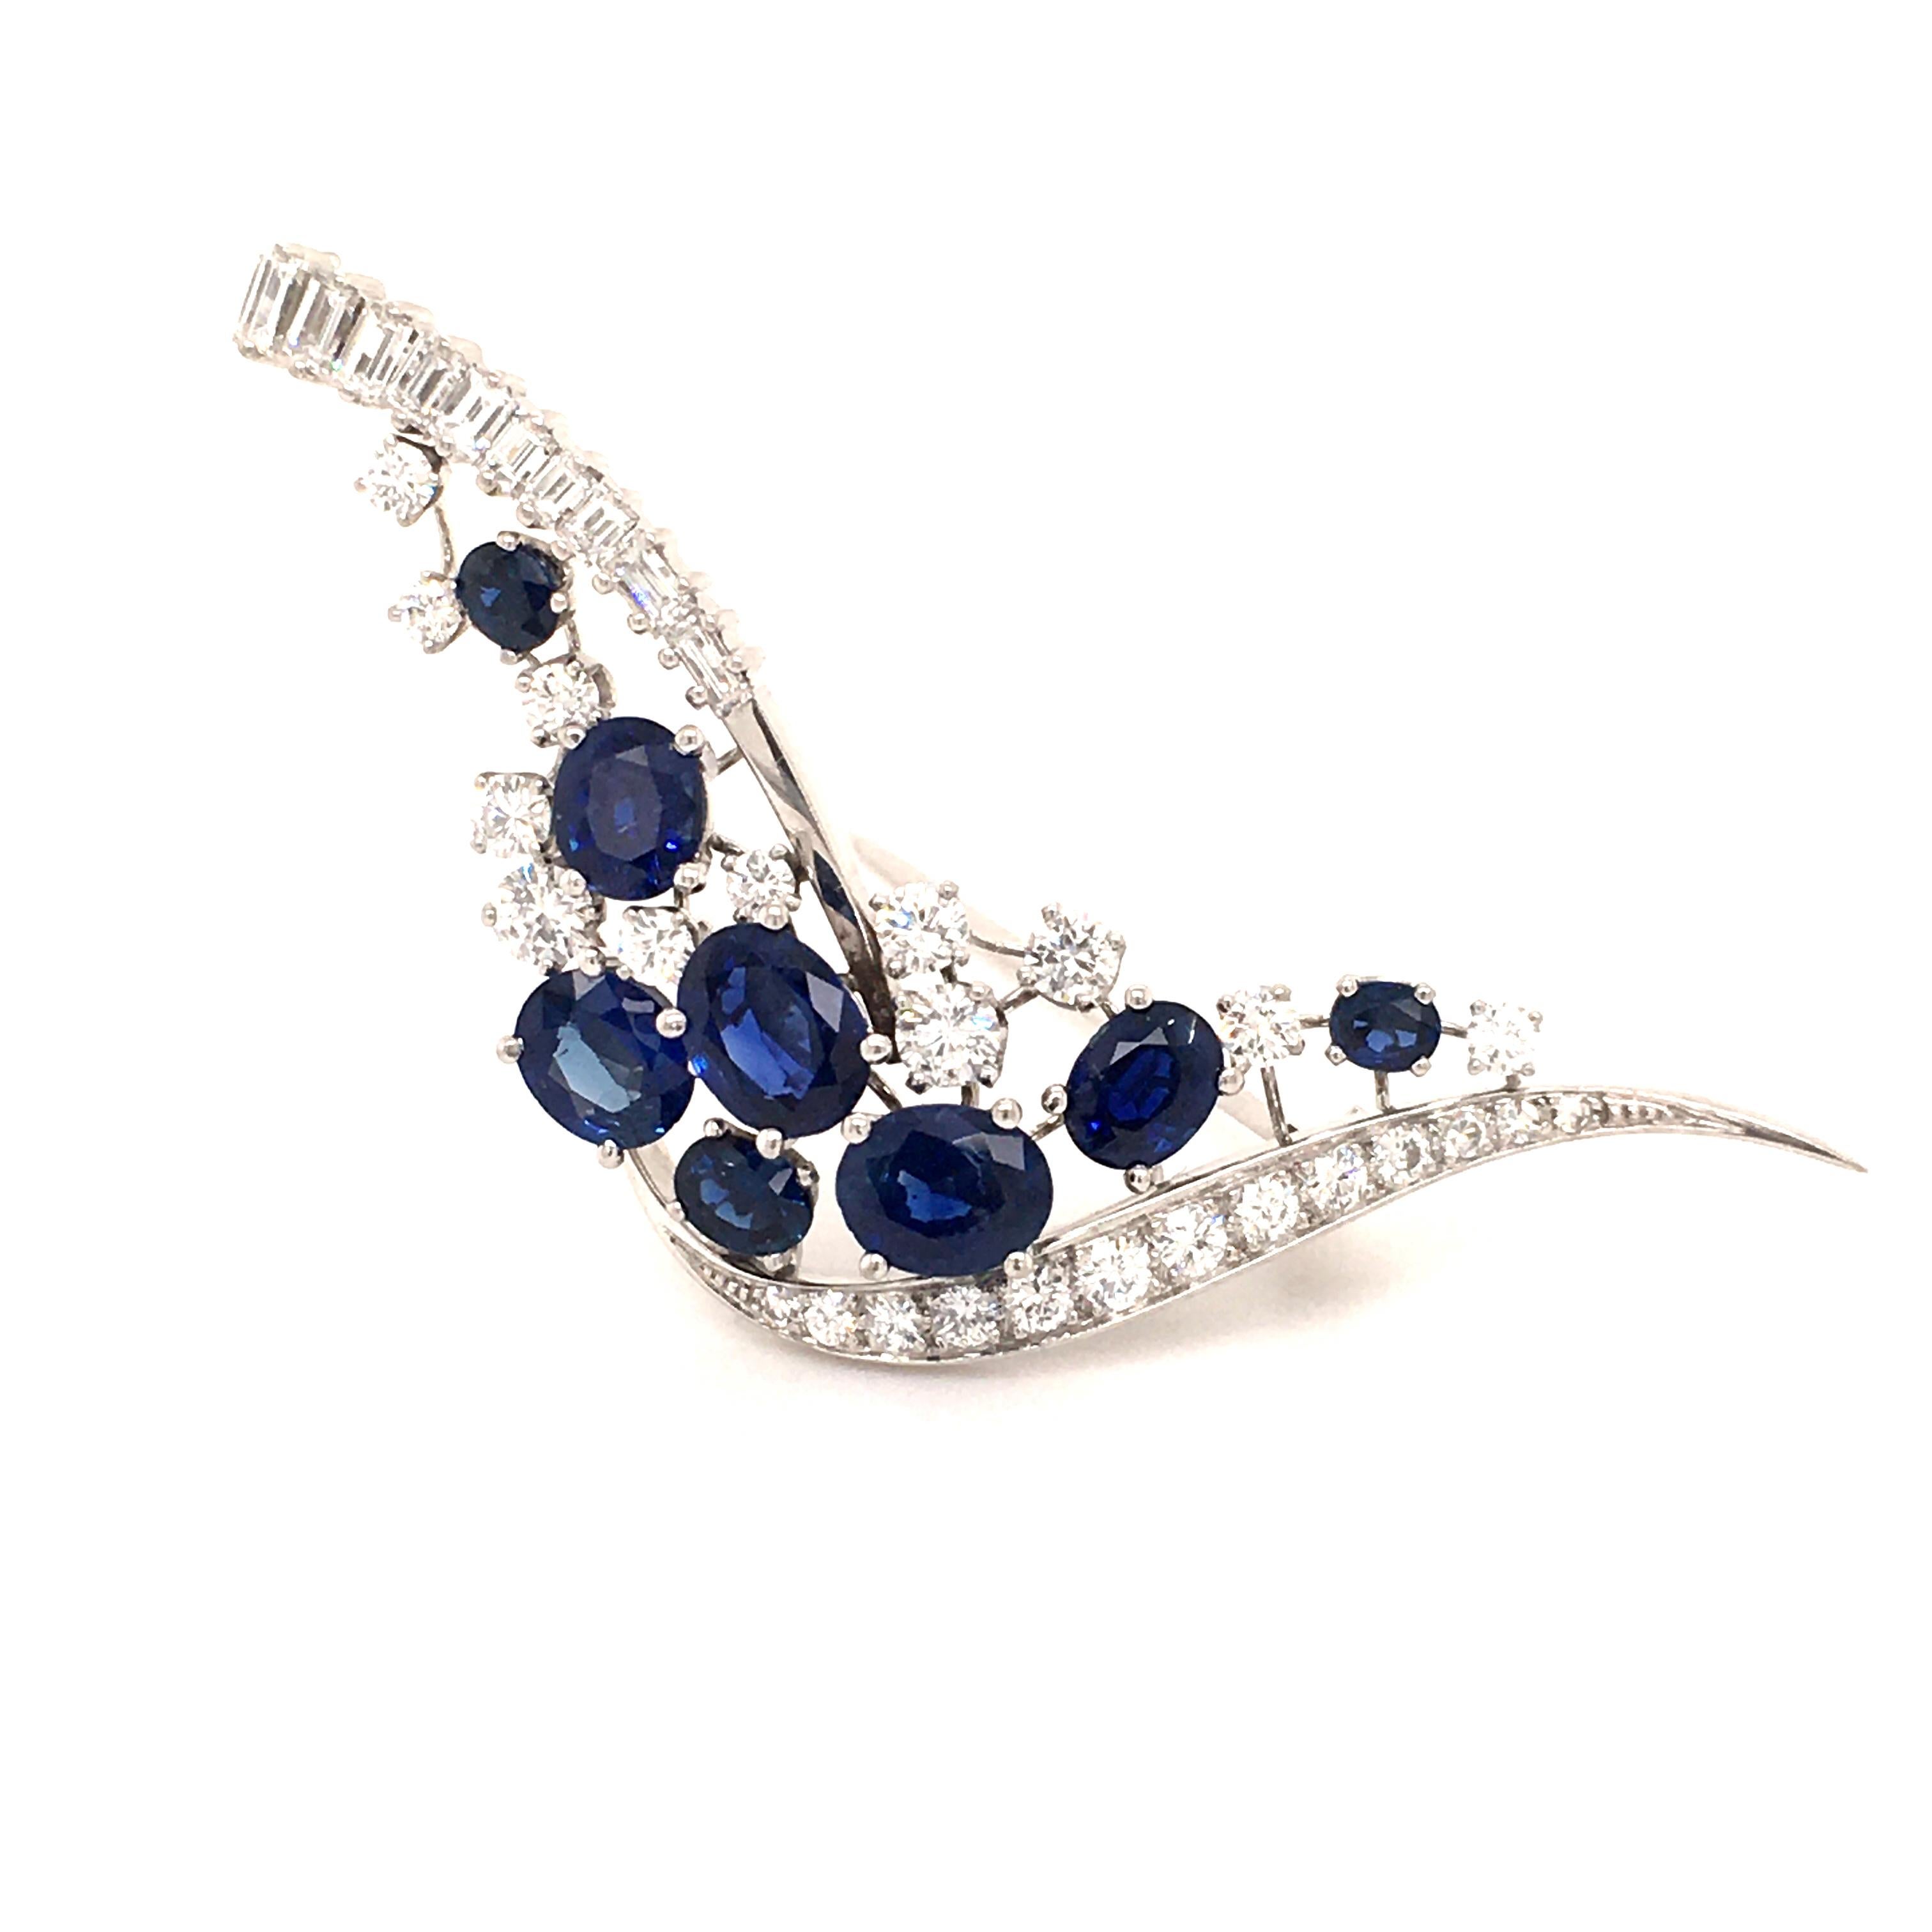 This stylized bird or wave brooch is set with 8 intensely colored oval shaped sapphires, total weight approximately 3.60 carats. Origine of the sapphires is Cambodia. Accented by 35 round and baguette shaped diamonds of G/H color and vs clarity,